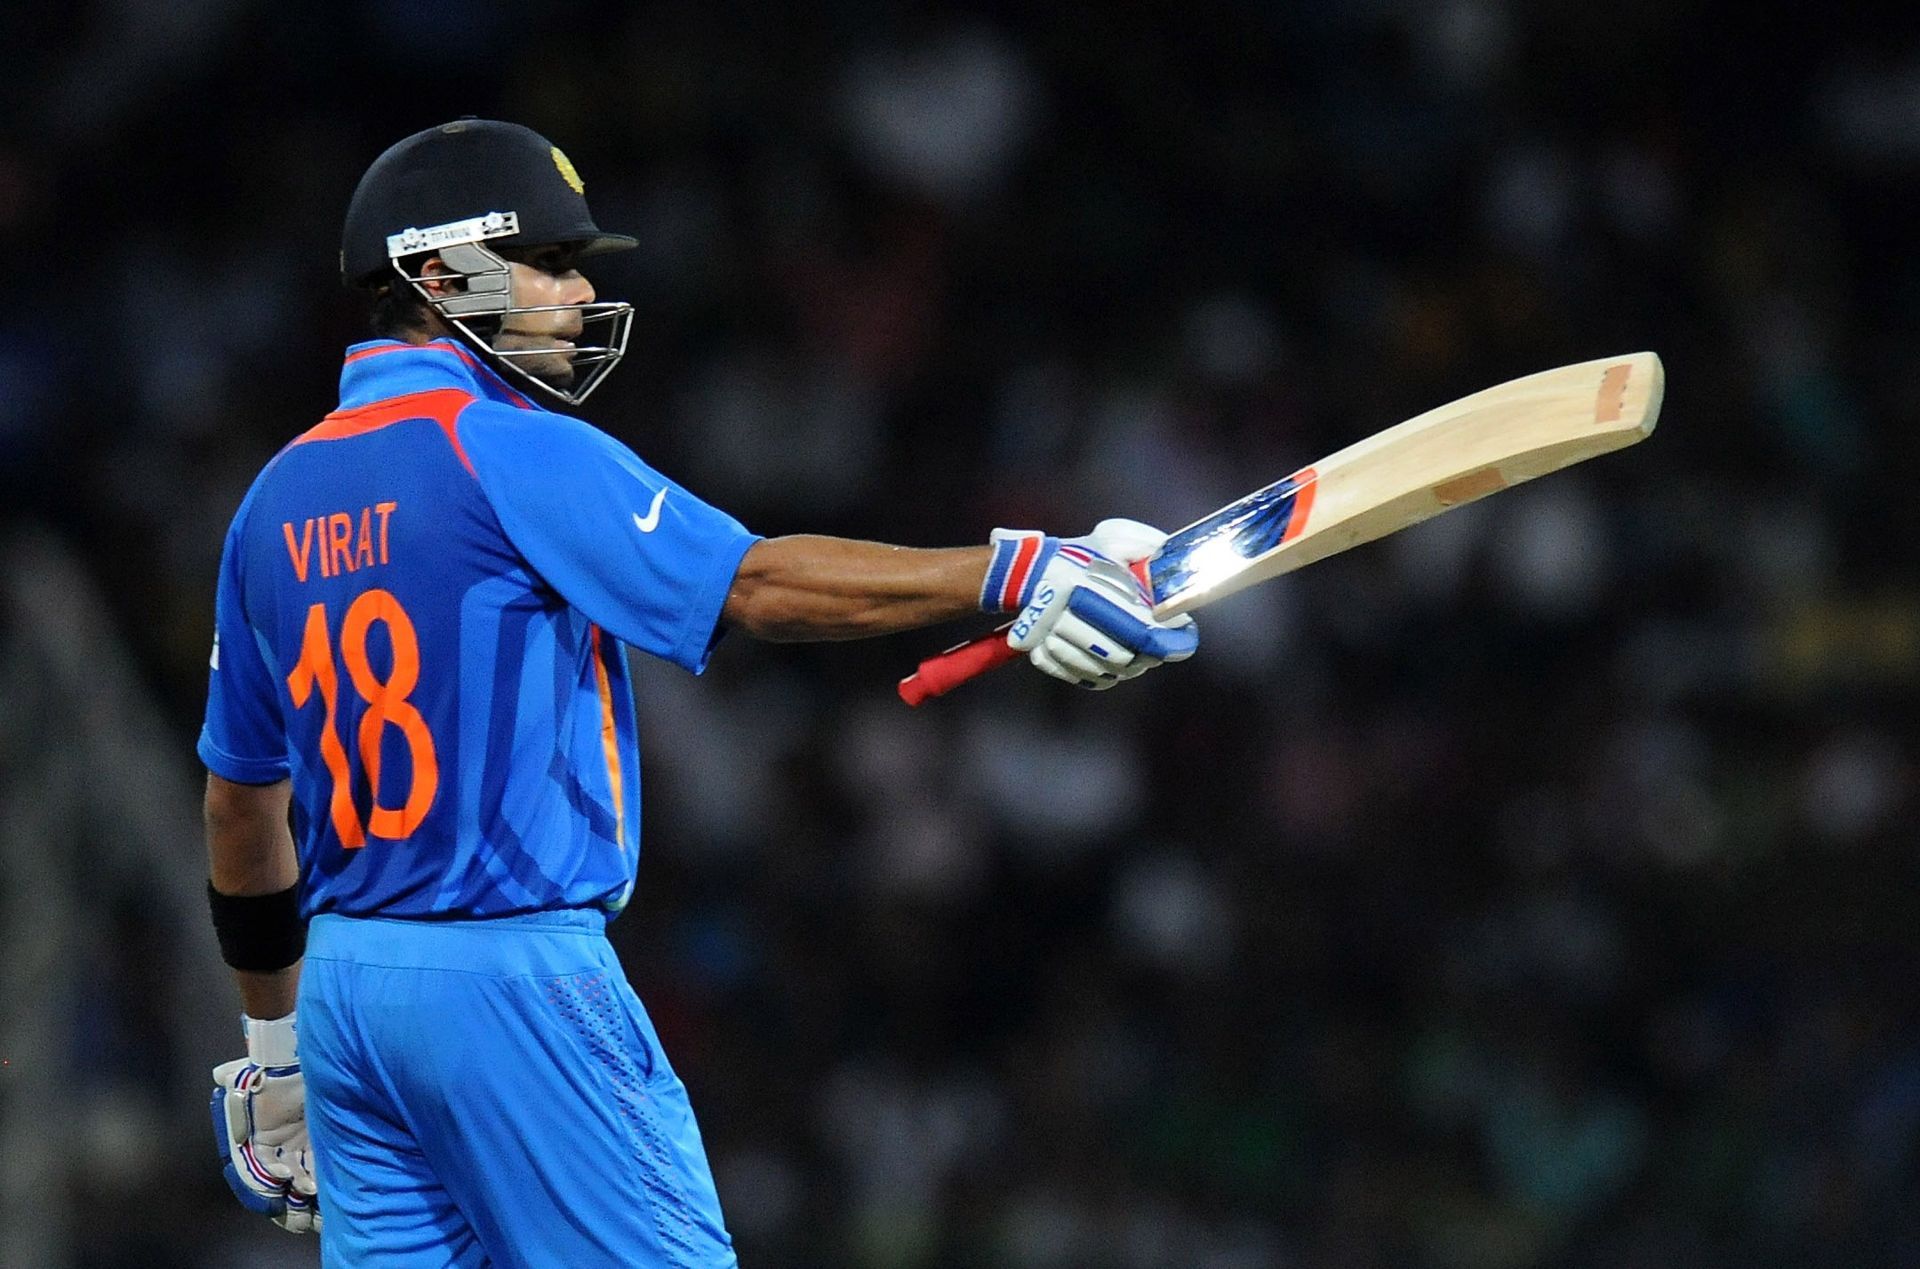 Virat Kohli carried the Indian batting order on his shoulders in the 2012 ICC T20 World Cup (Image: Getty)